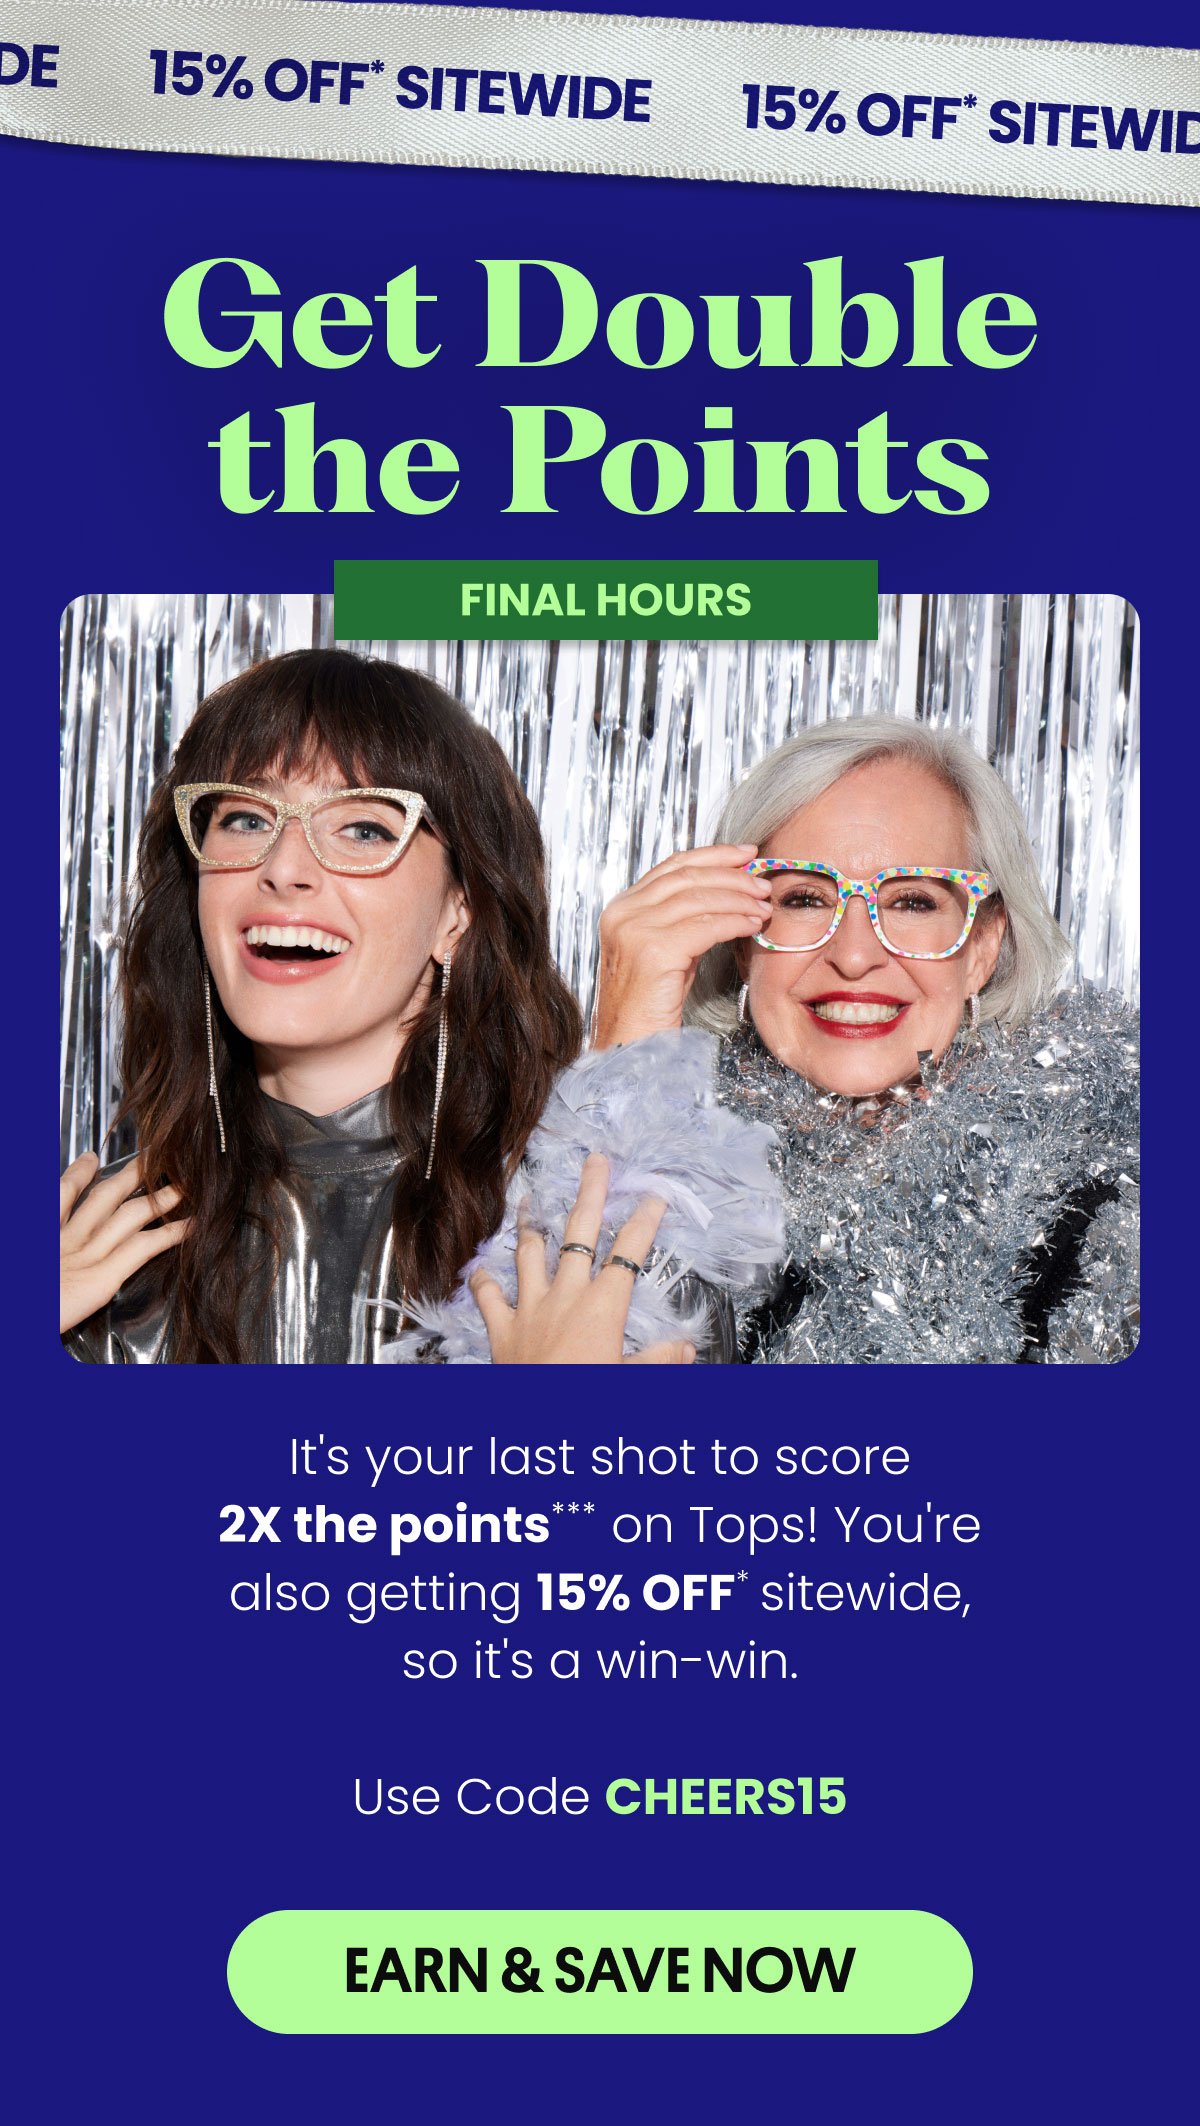 Get Double the Points